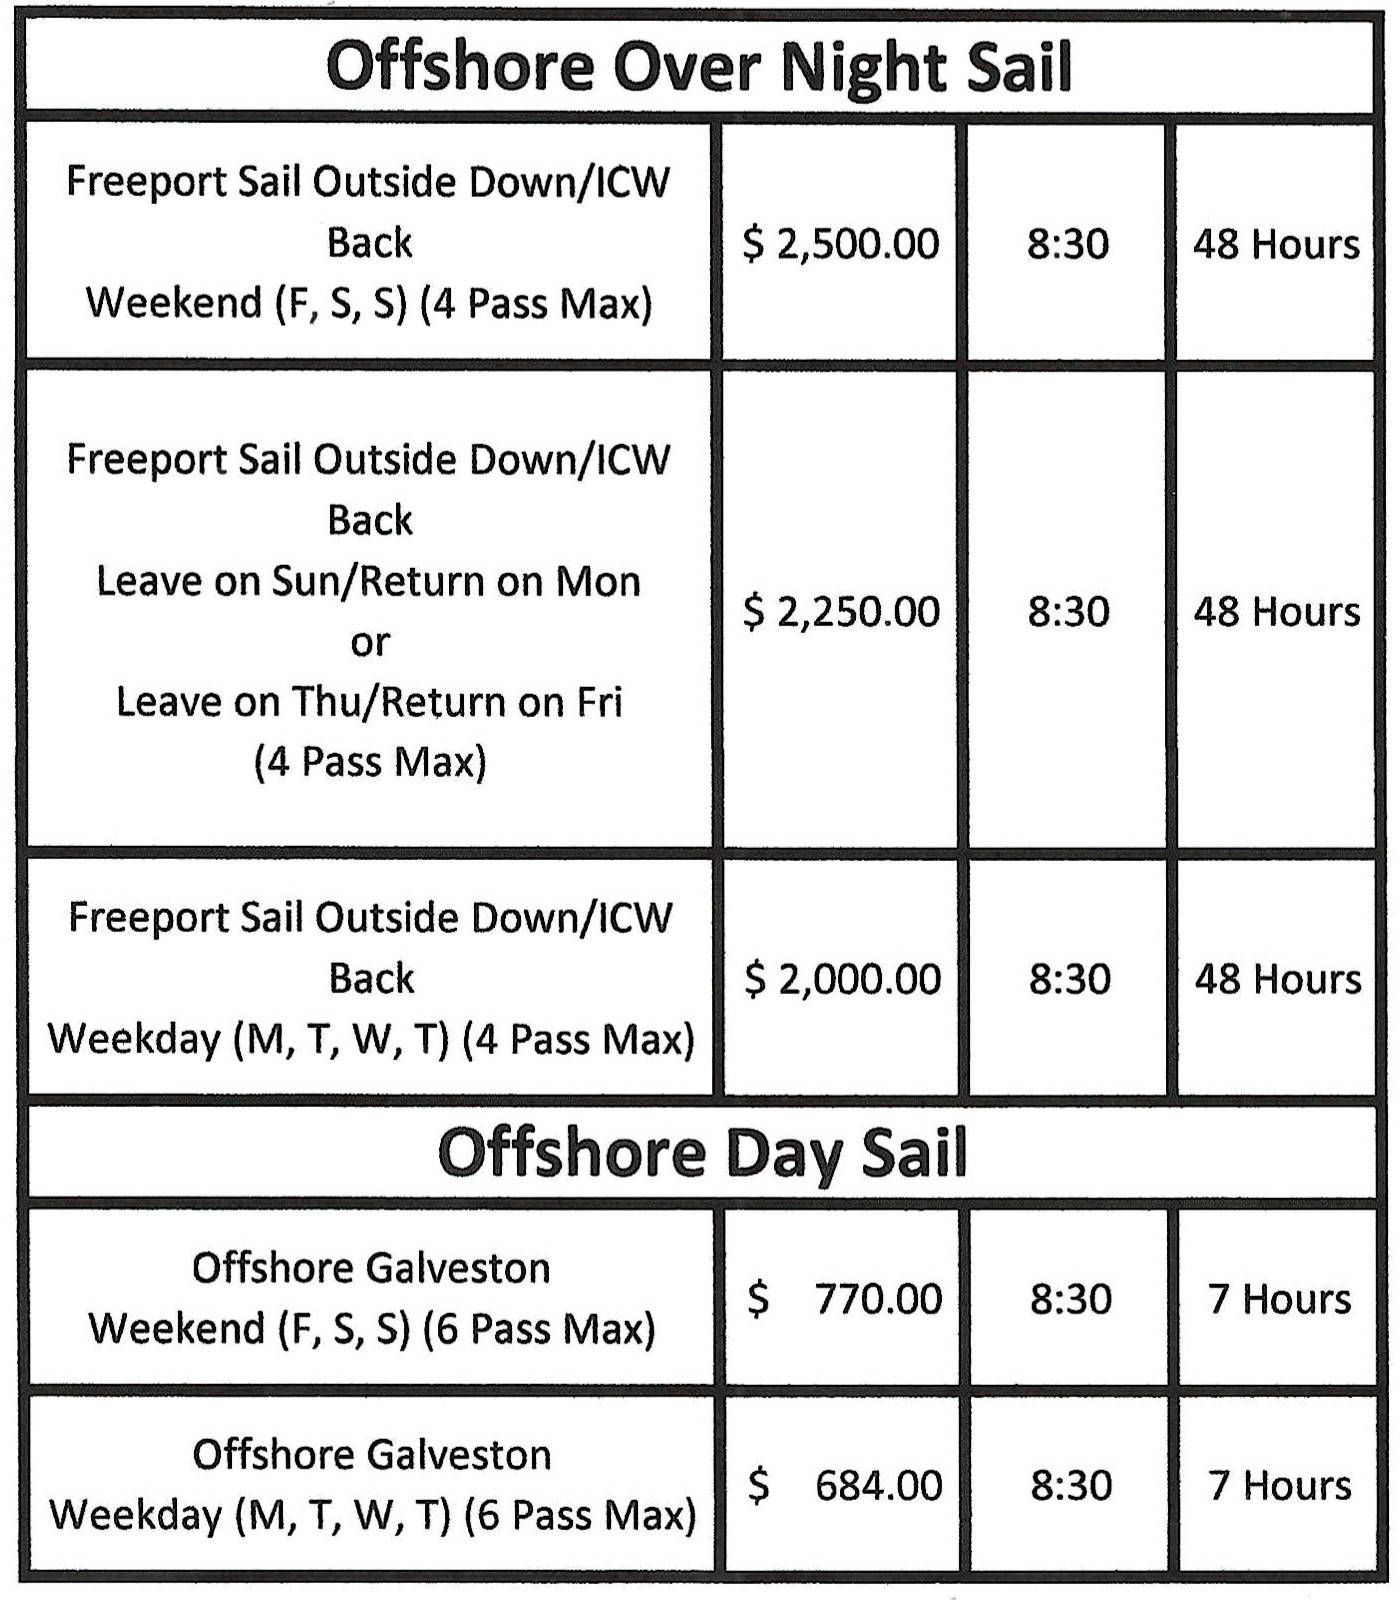 Offshore sailing rate 20230208